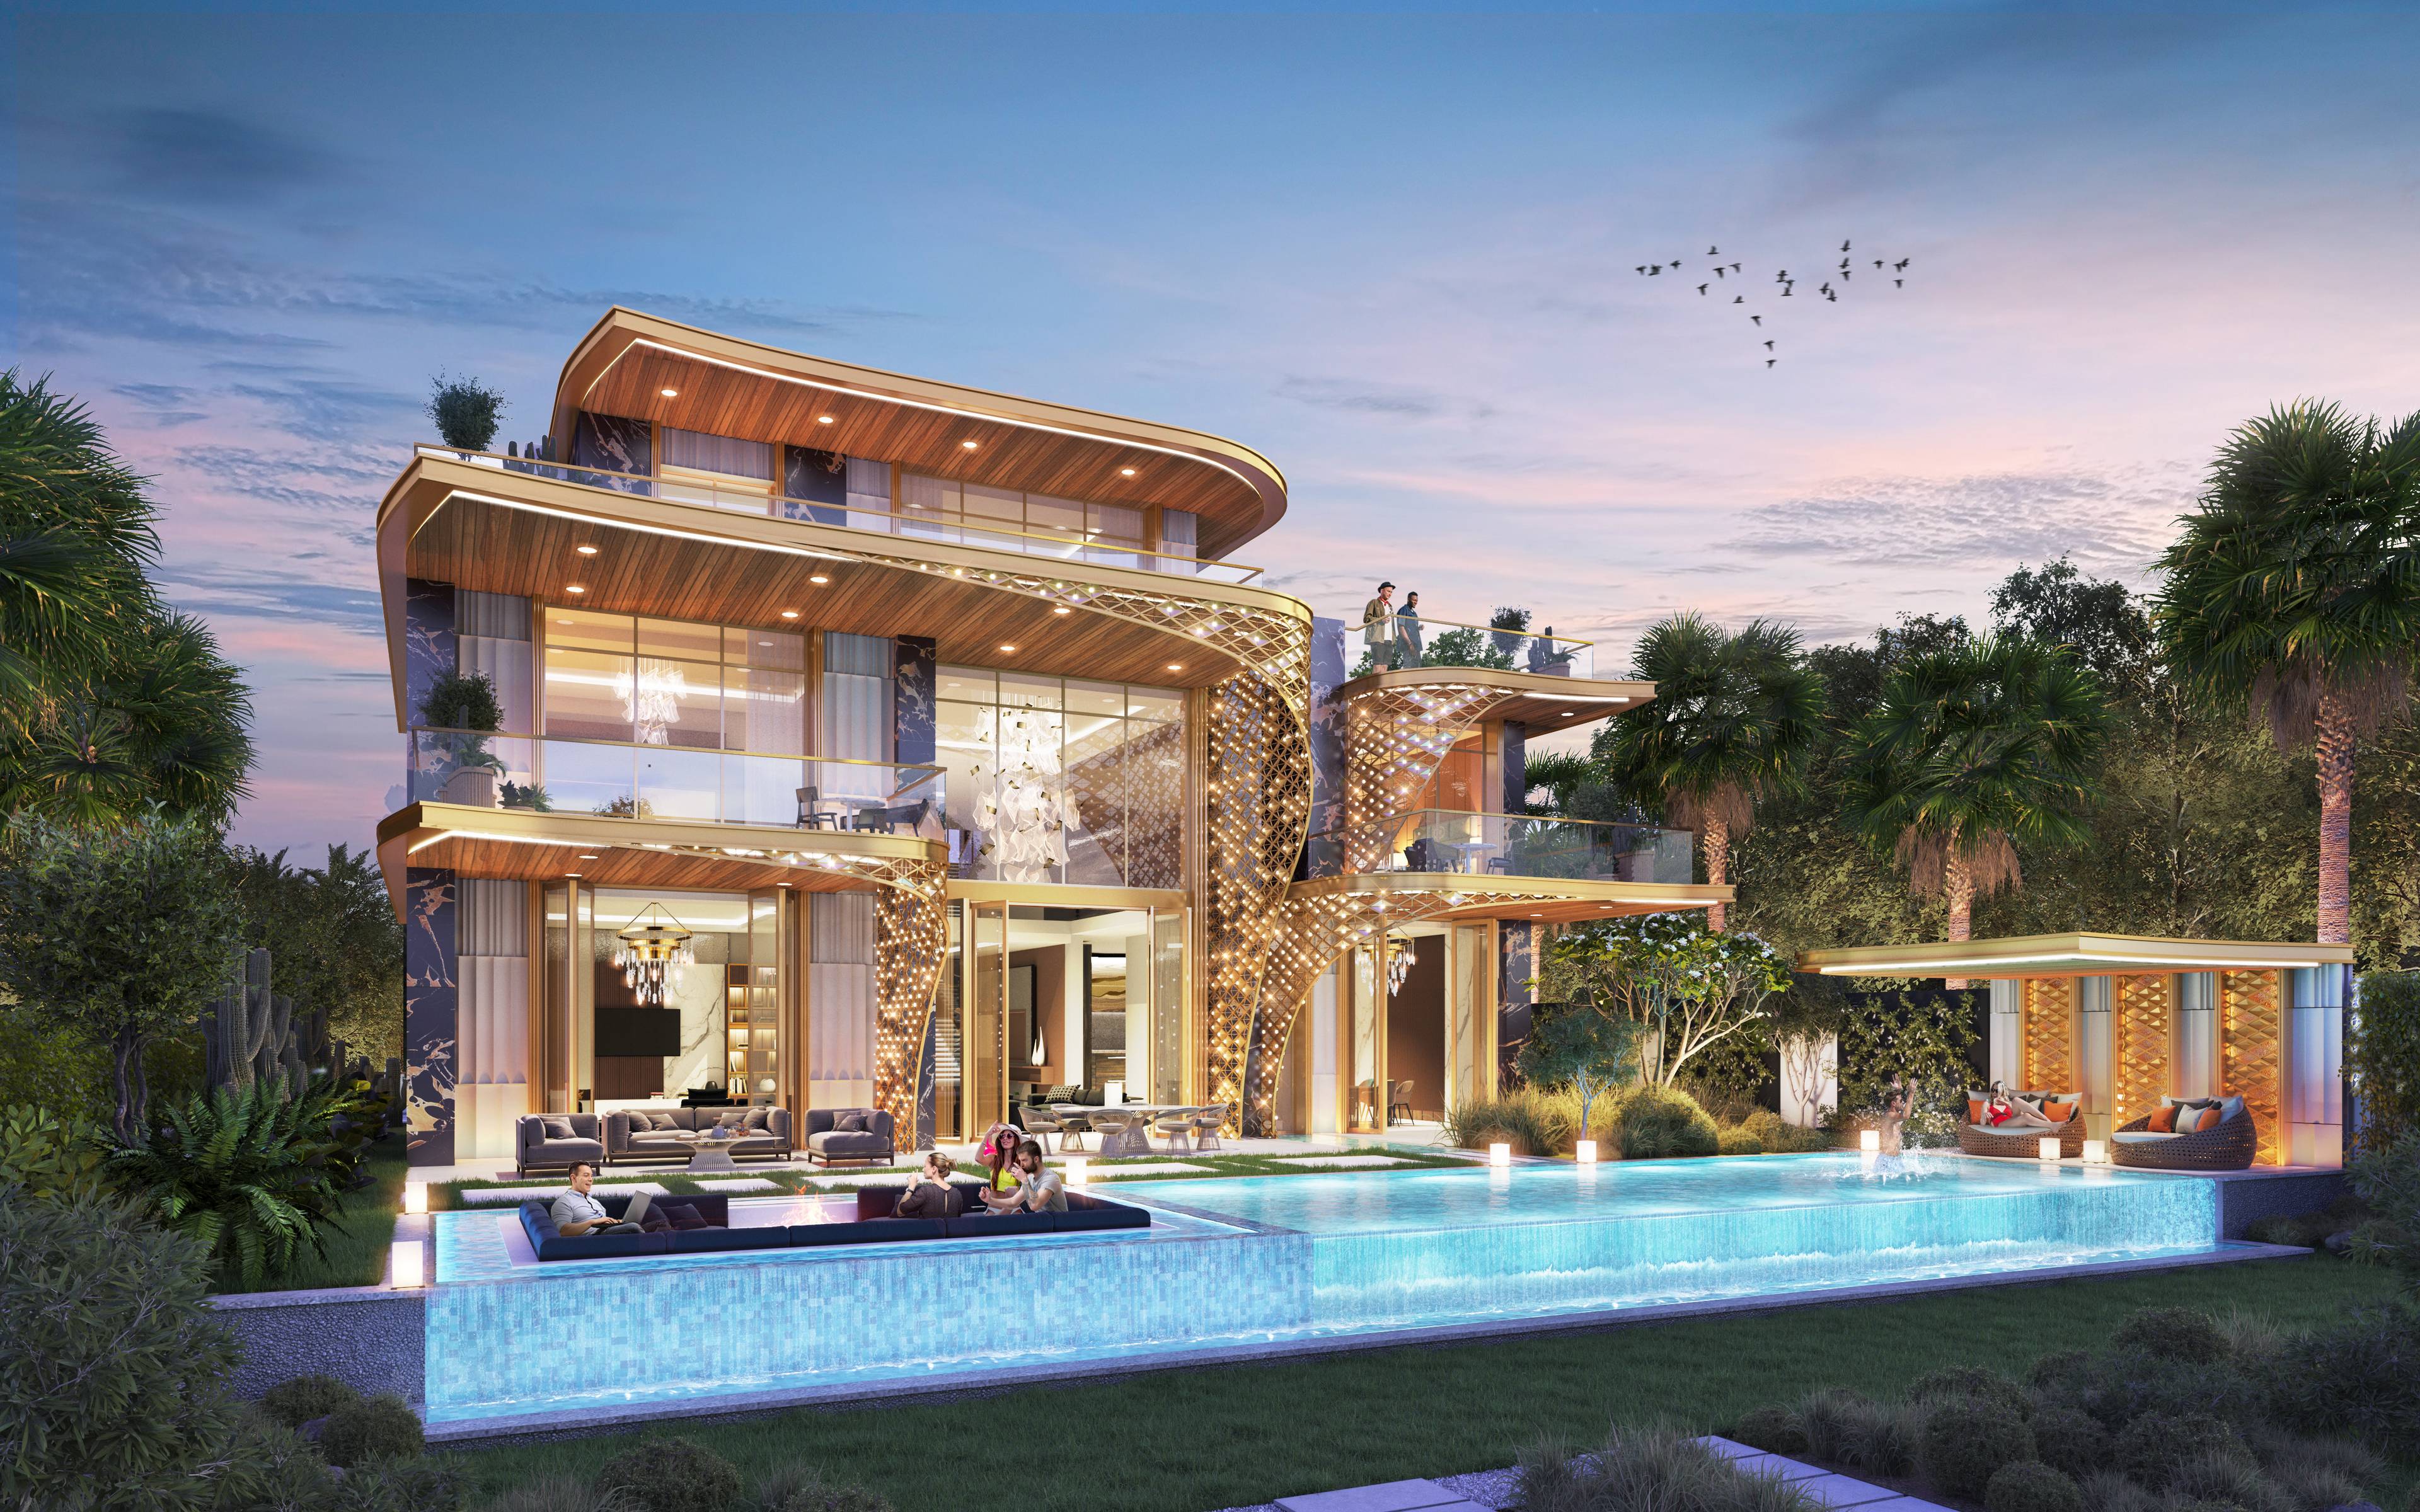 6-BEDROOM VILLA WITH INFINITY POOL, CINEMA, AND SPORTING OASIS IN DAMAC HILLS